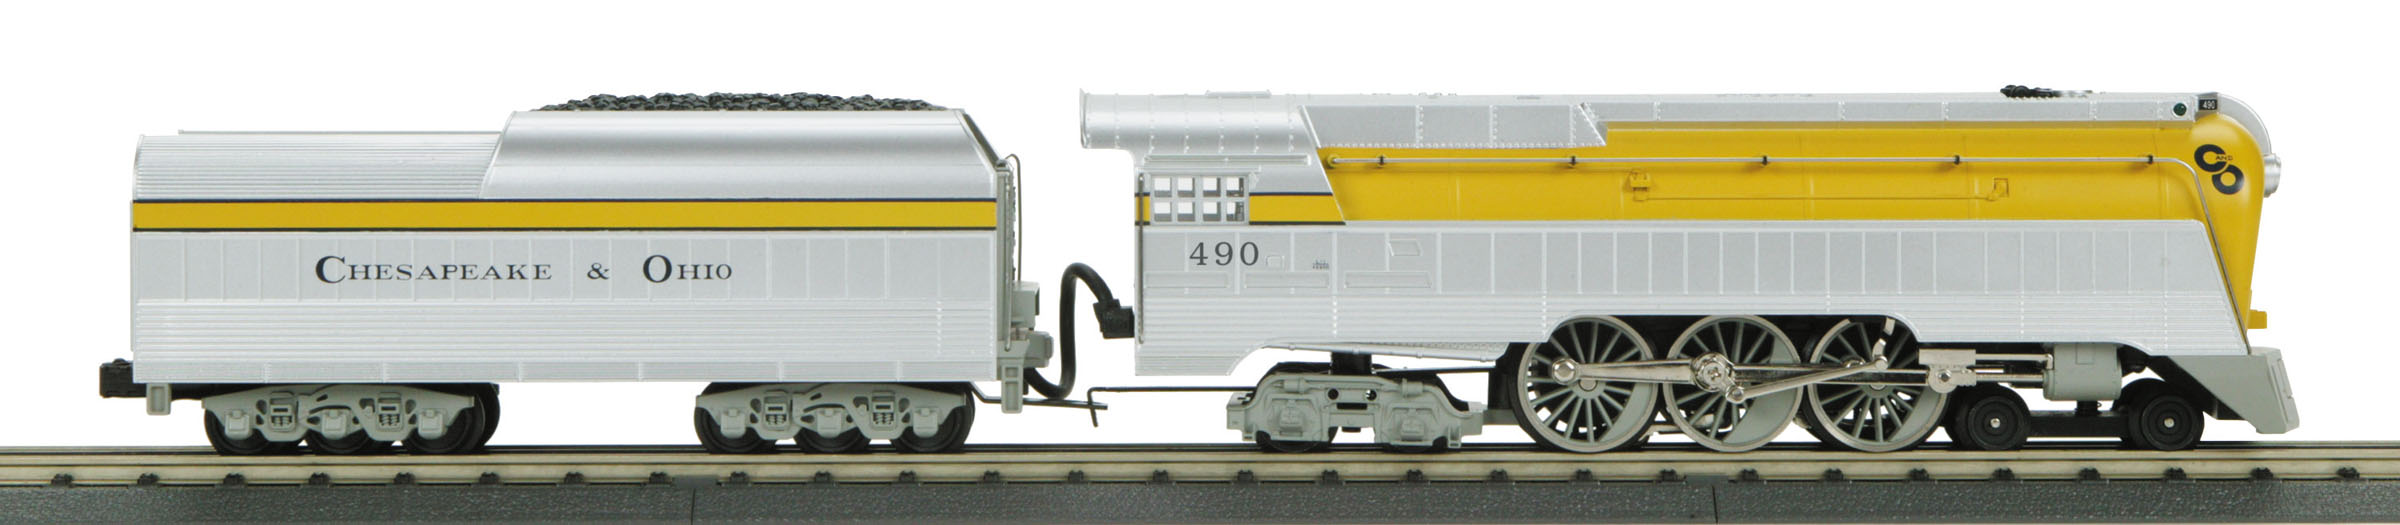 30-1412-1 | MTH ELECTRIC TRAINS